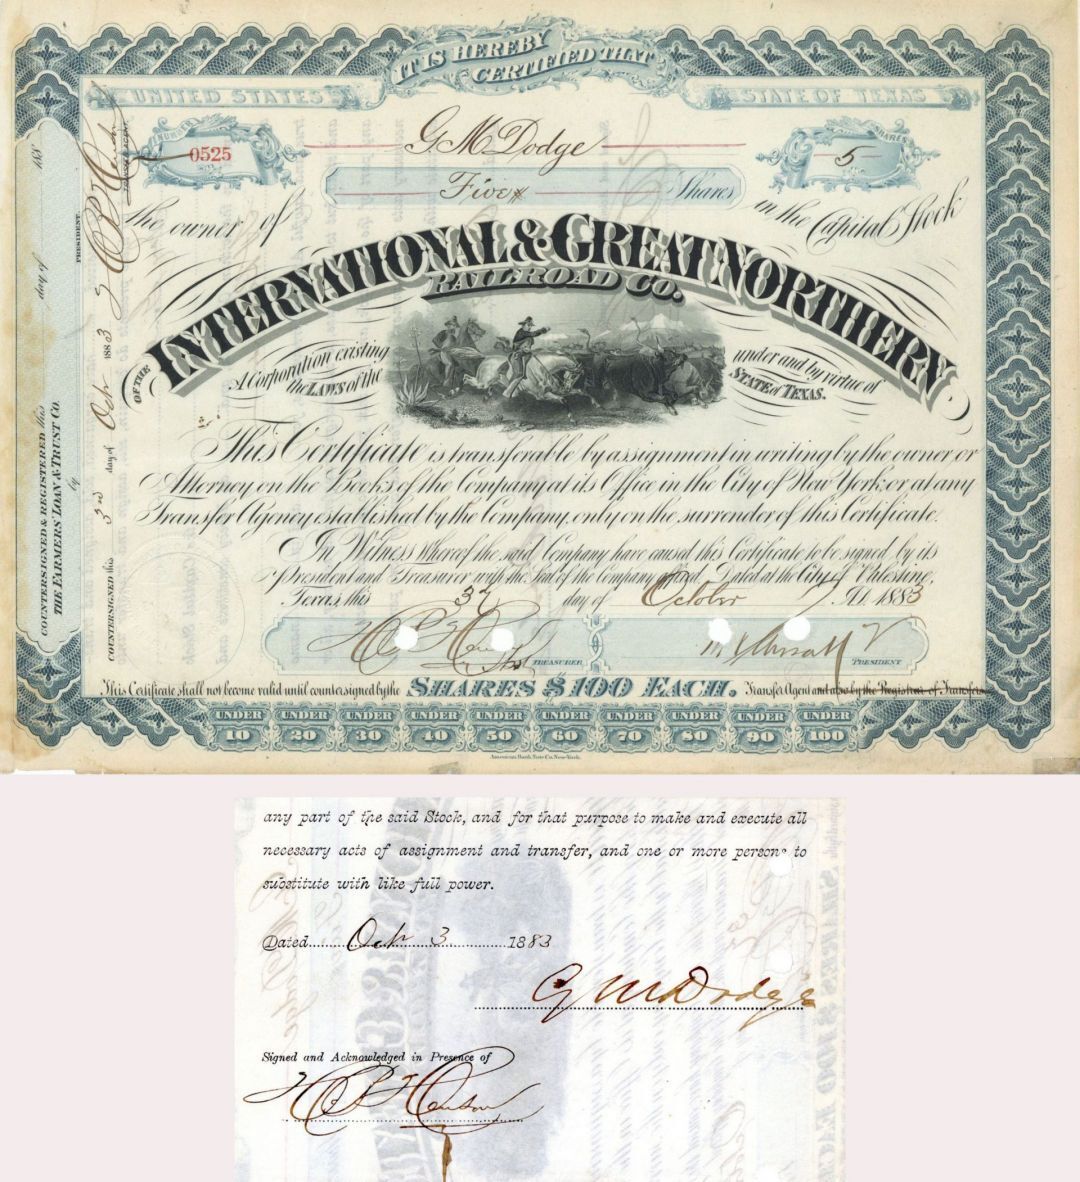 International and Great Northern Railroad Co. Issued to and Signed by G.M. Dodge